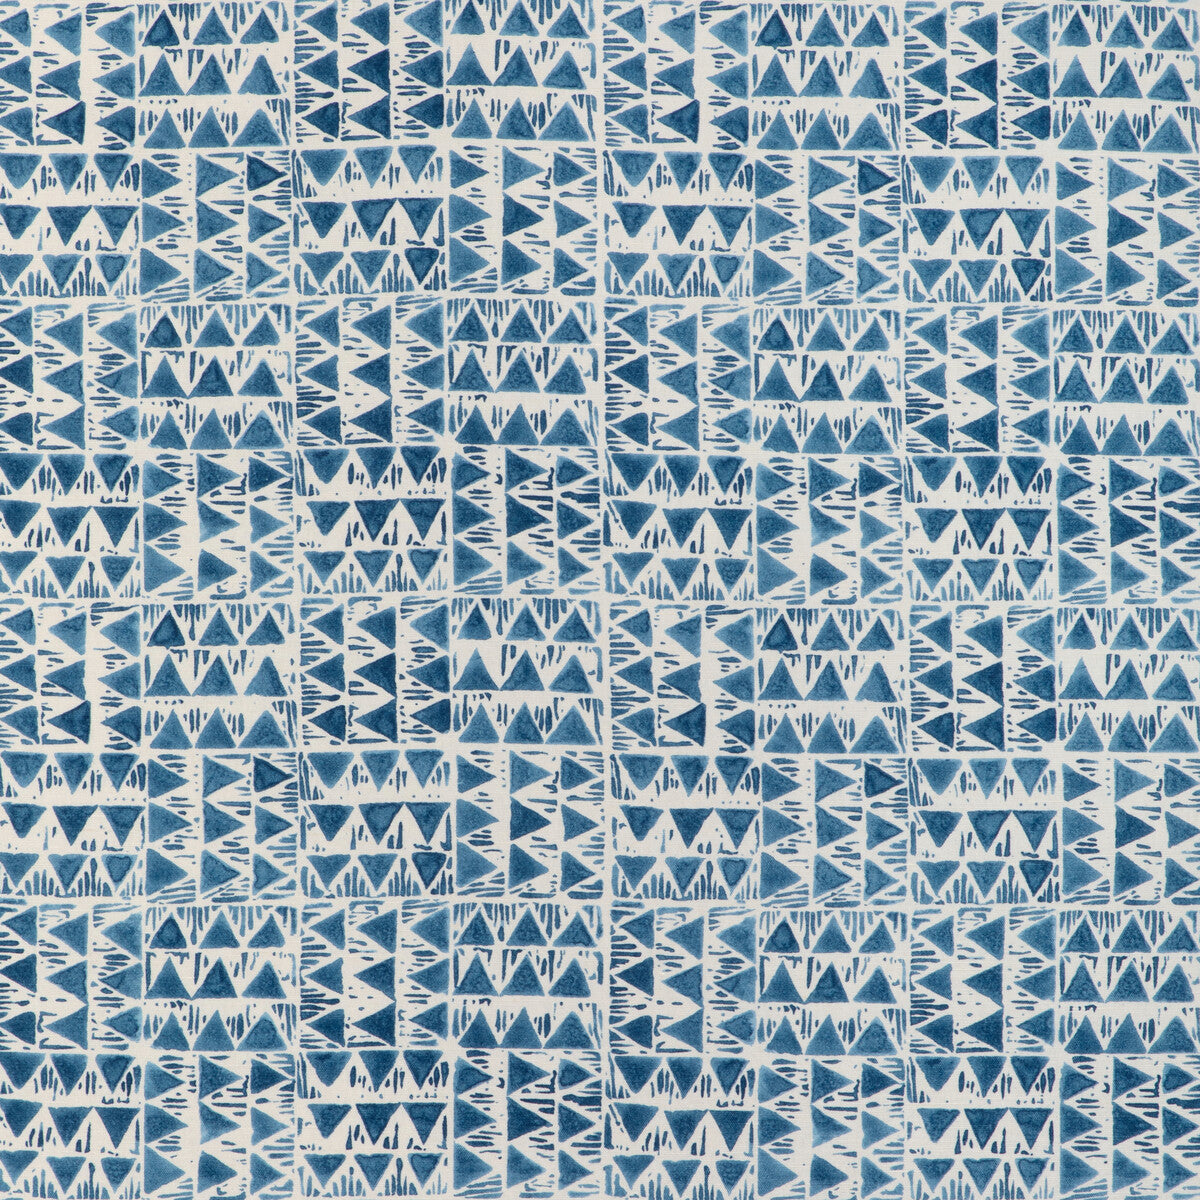 Yampa Print fabric in bay color - pattern 2020210.5.0 - by Lee Jofa in the Clare Prints collection